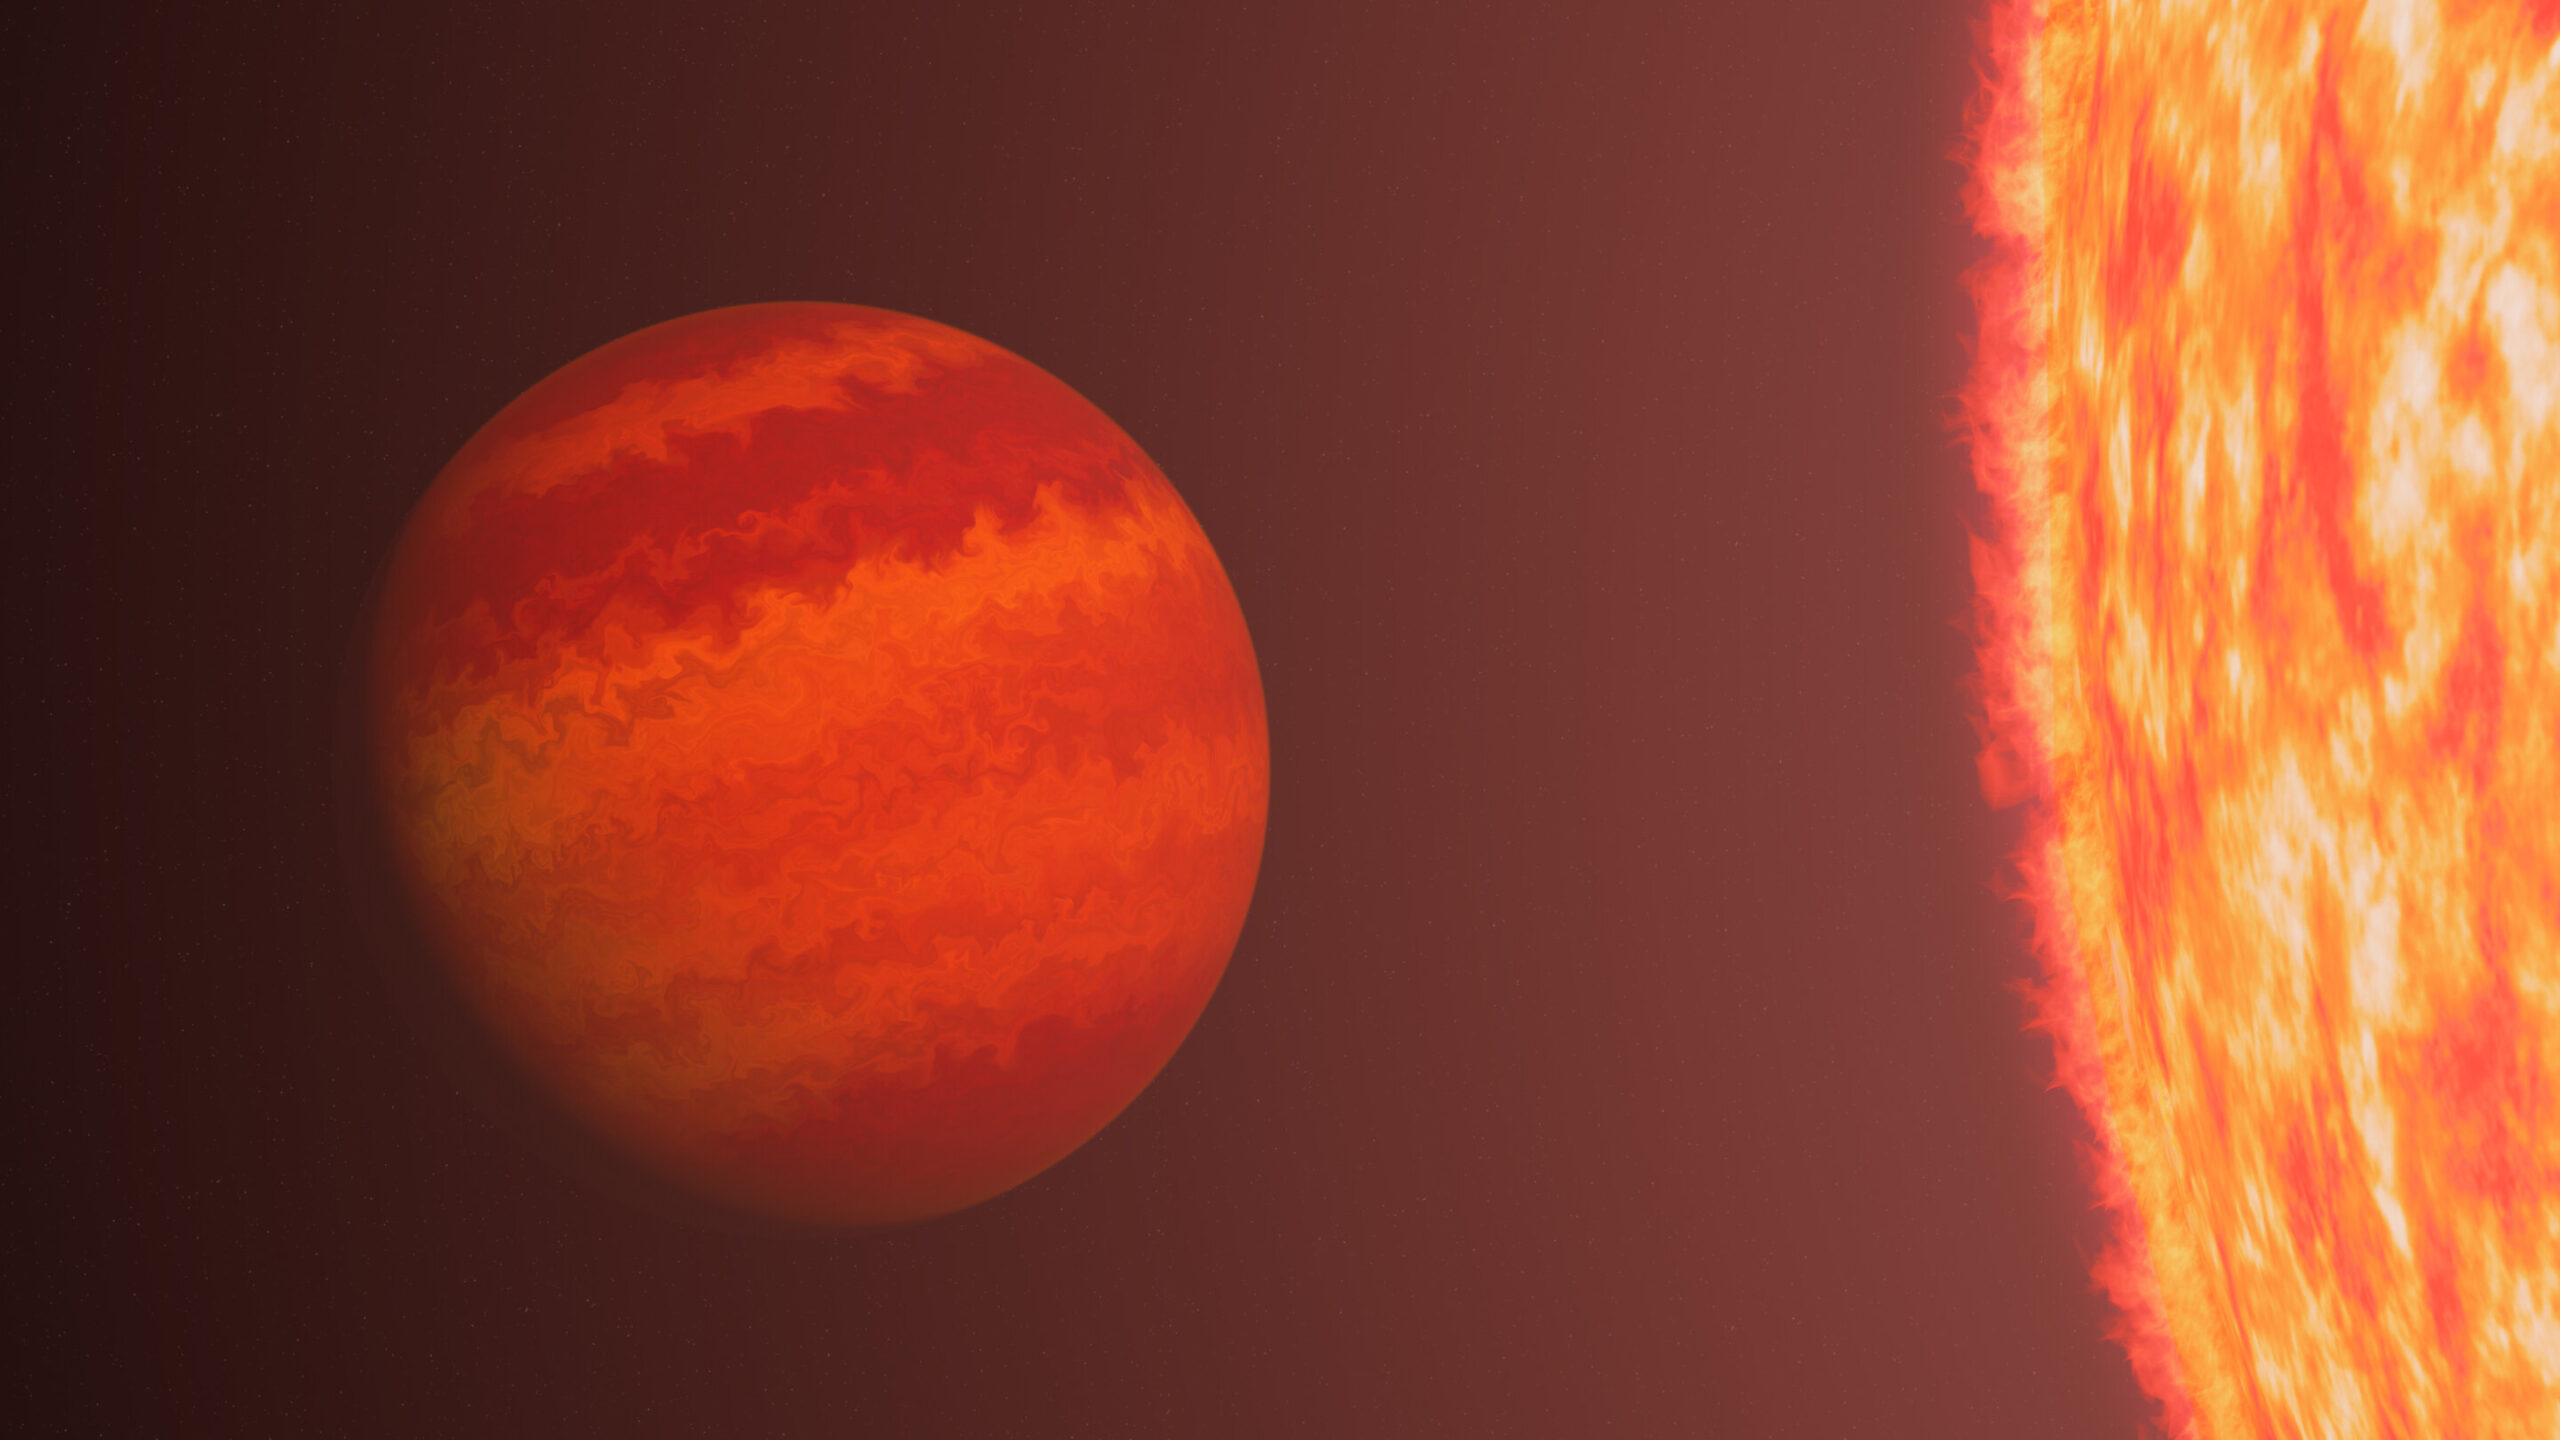 A surprising exoplanet survives the rays of a star